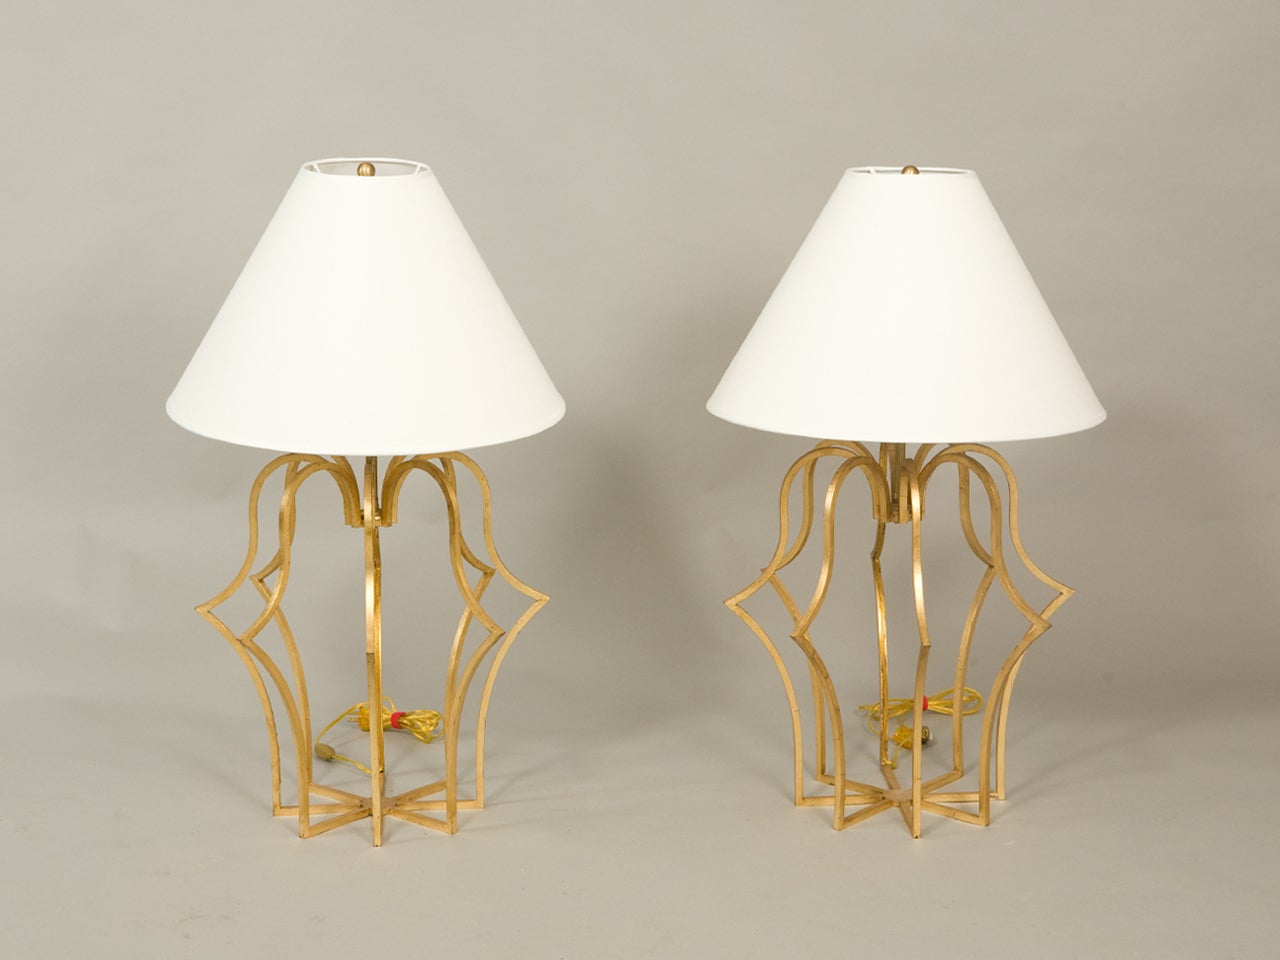 Pair of Gilded Iron Table Lamps